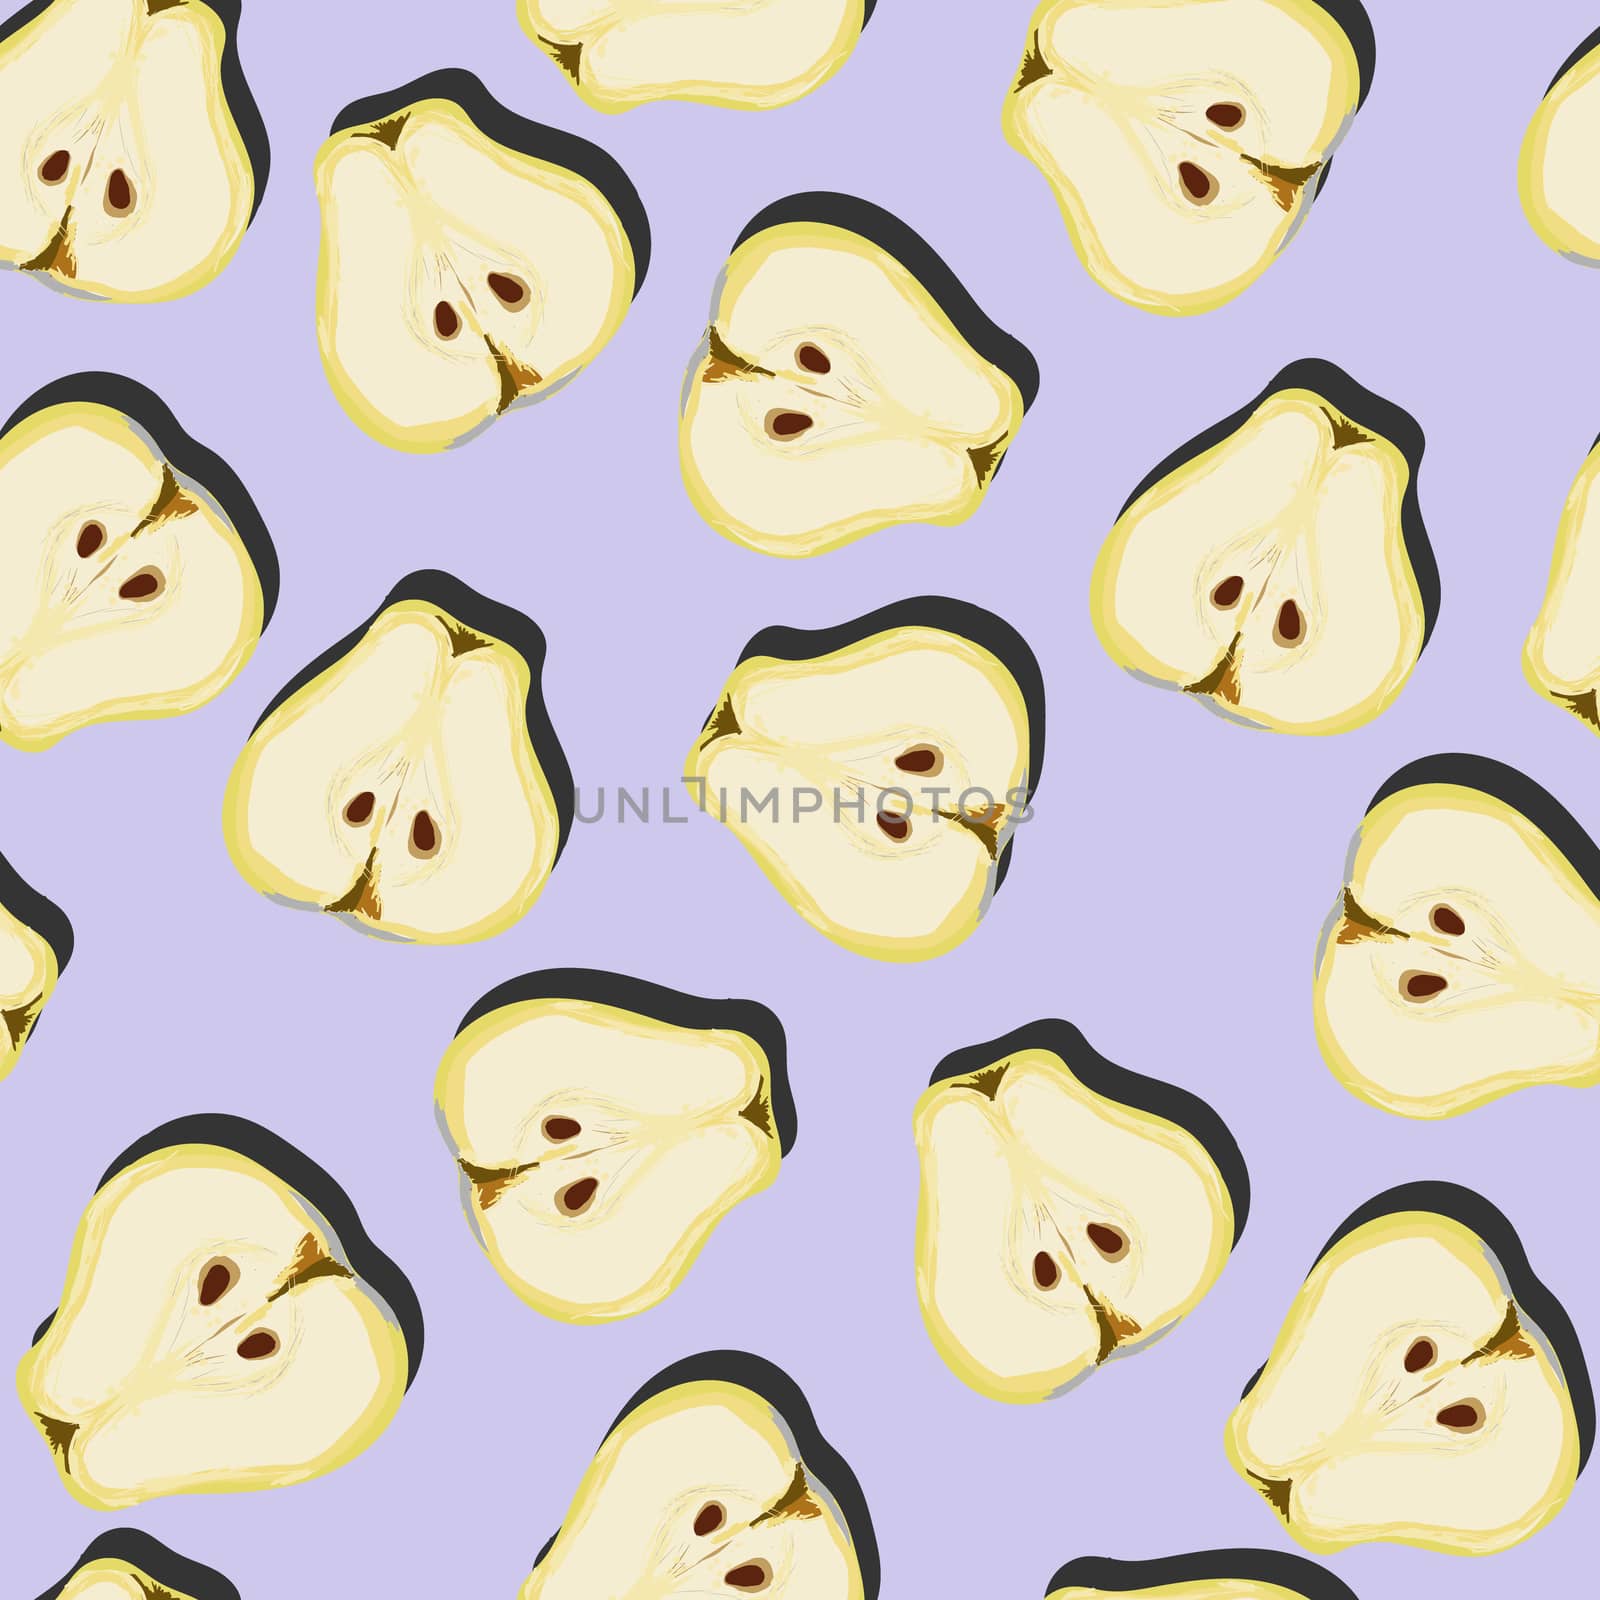 Cut half juicy pear top view pop art with shadow seamless pattern on lilac background. Summer fruit endless design for wallpapers, fabrics, textiles, packaging.